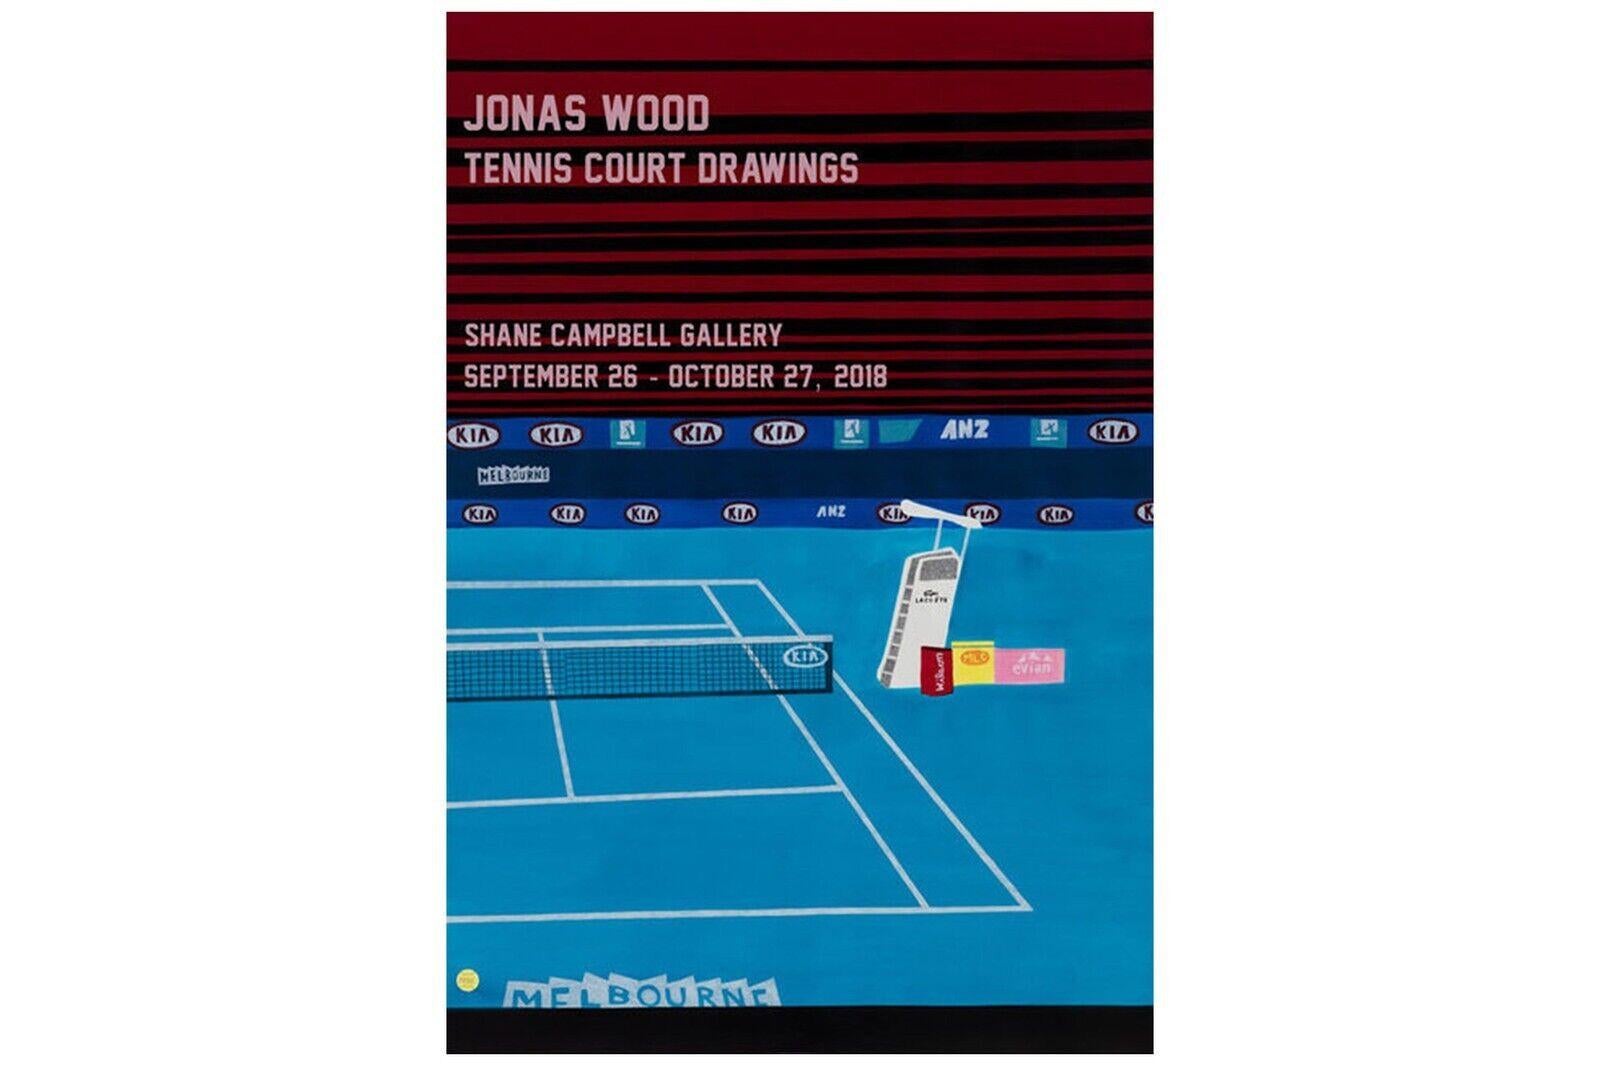 "TENNIS COURT DRAWINGS EXHIBITION POSTER" by Jonas Wood
Year: 2018
Medium: Poster
Dimensions: 91.4 x 61 cm / 36 x 24 in

Immerse yourself in the vibrant world of contemporary art with this captivating exhibition poster by Jonas Wood. Created in 2018